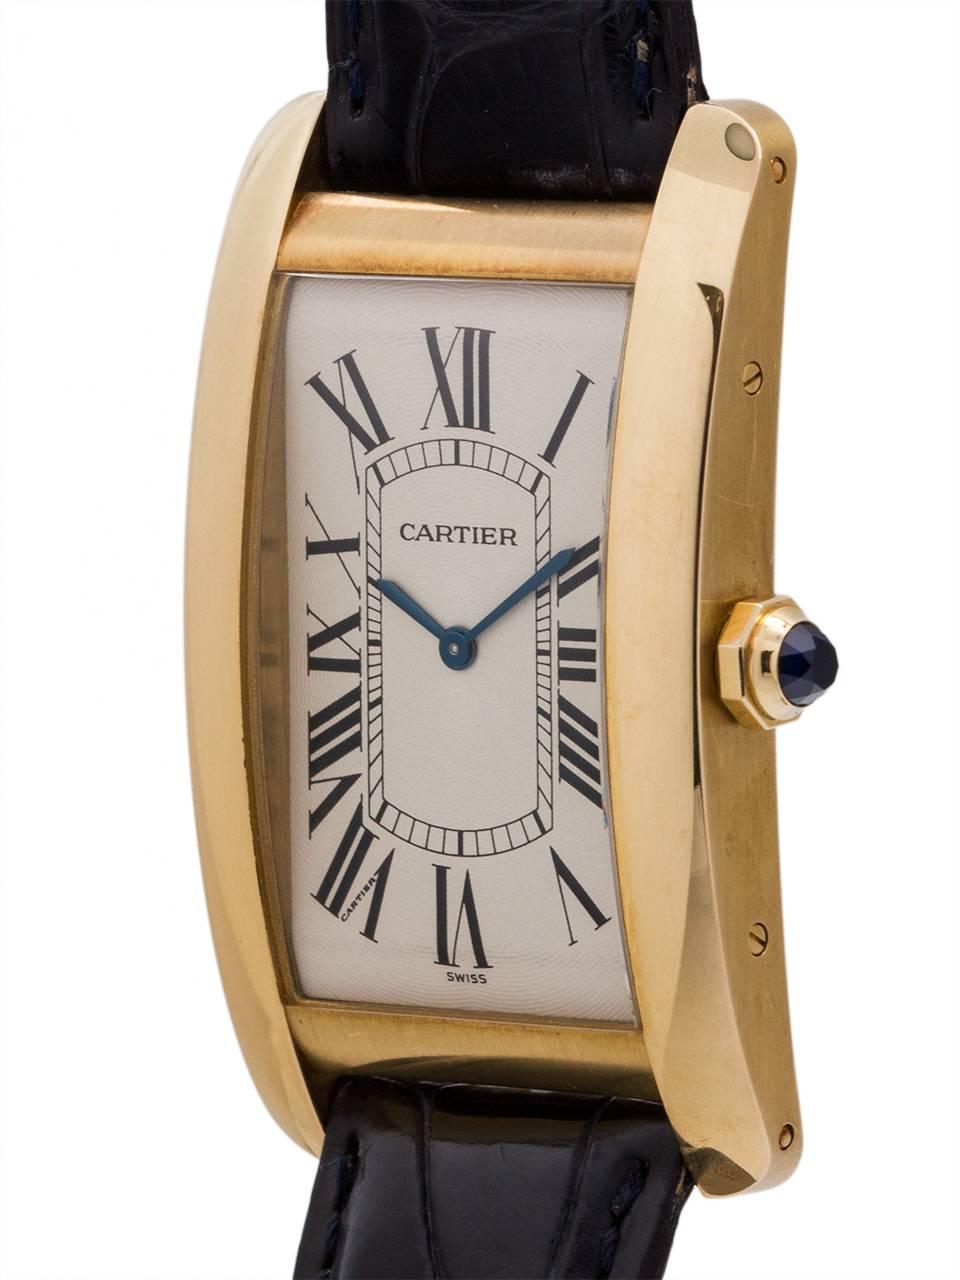 
Man’s large size Cartier Tank American (Americaine) 18K YG circa 1990’s. Featuring oversize 28 x 46mm case with wide polished bezel, curved sapphire crystal, original antique white dial with classic oversize Roman numerals, and powered by 17 jewel